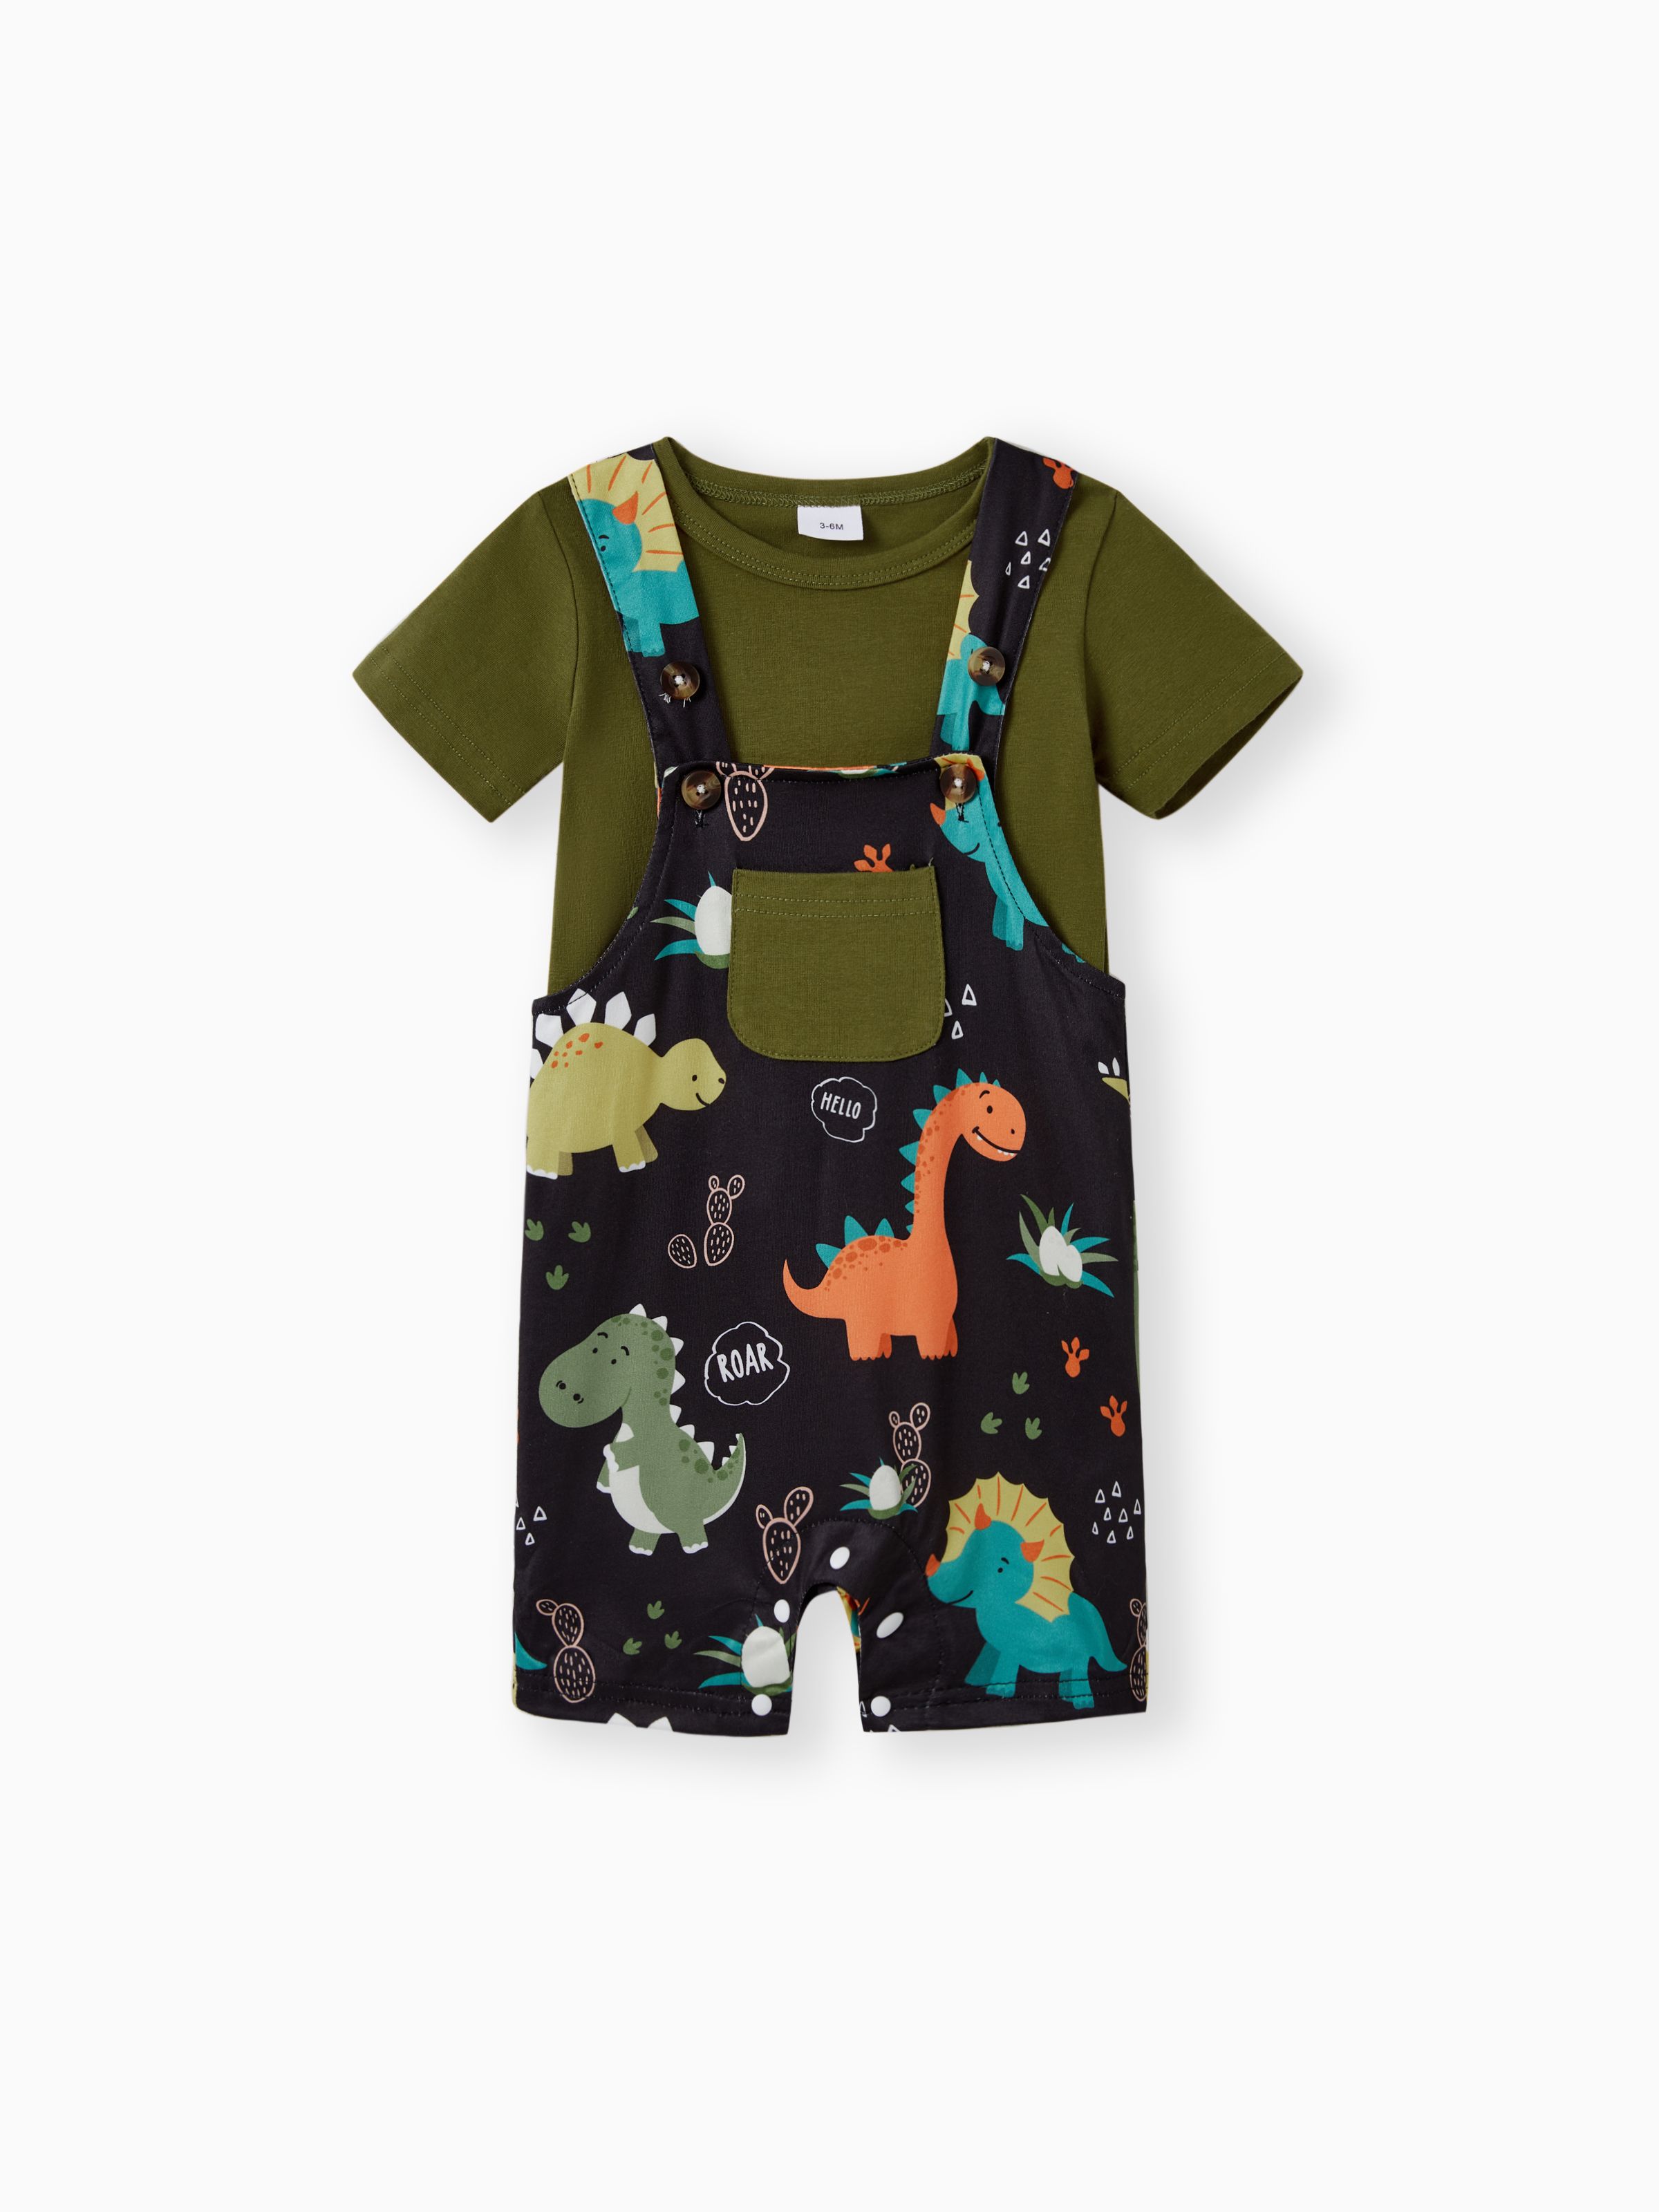 

2pcs Baby Boy Short-sleeve Solid Tee and Allover Dinosaur Print Overall Romper Set